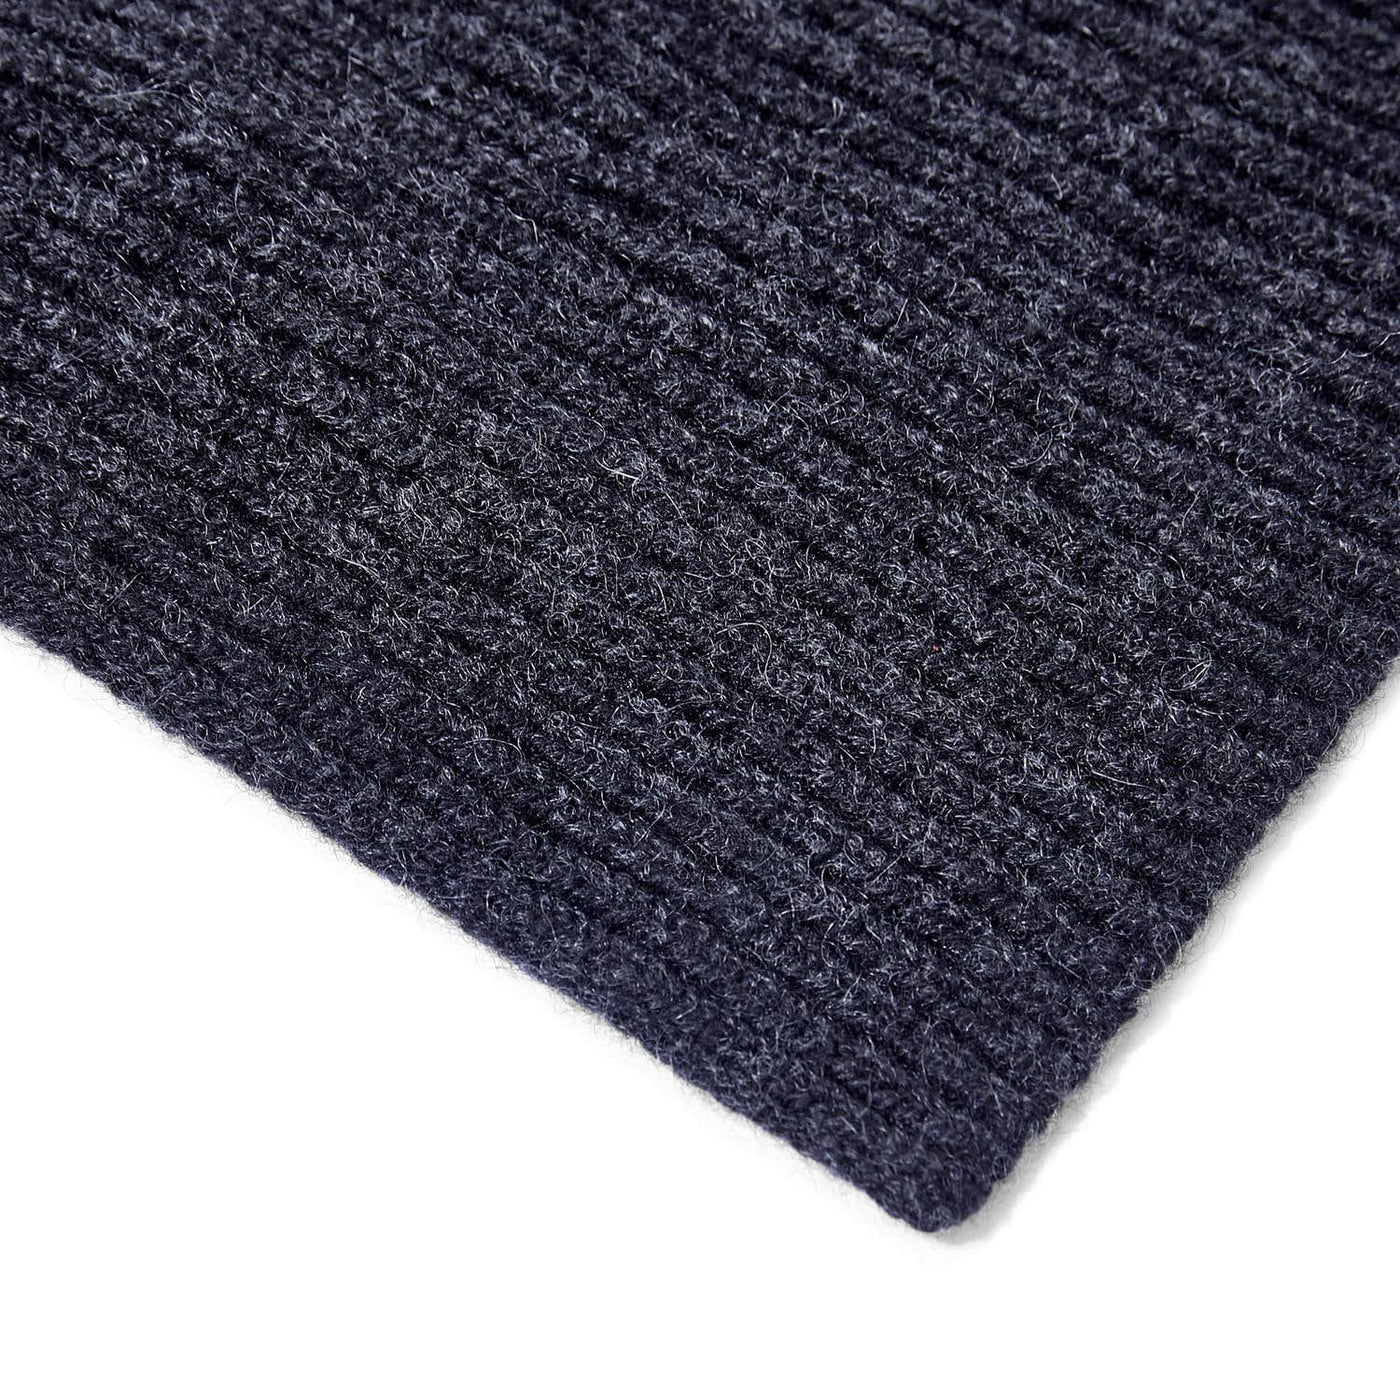 charcoal knitted cashmere scarf